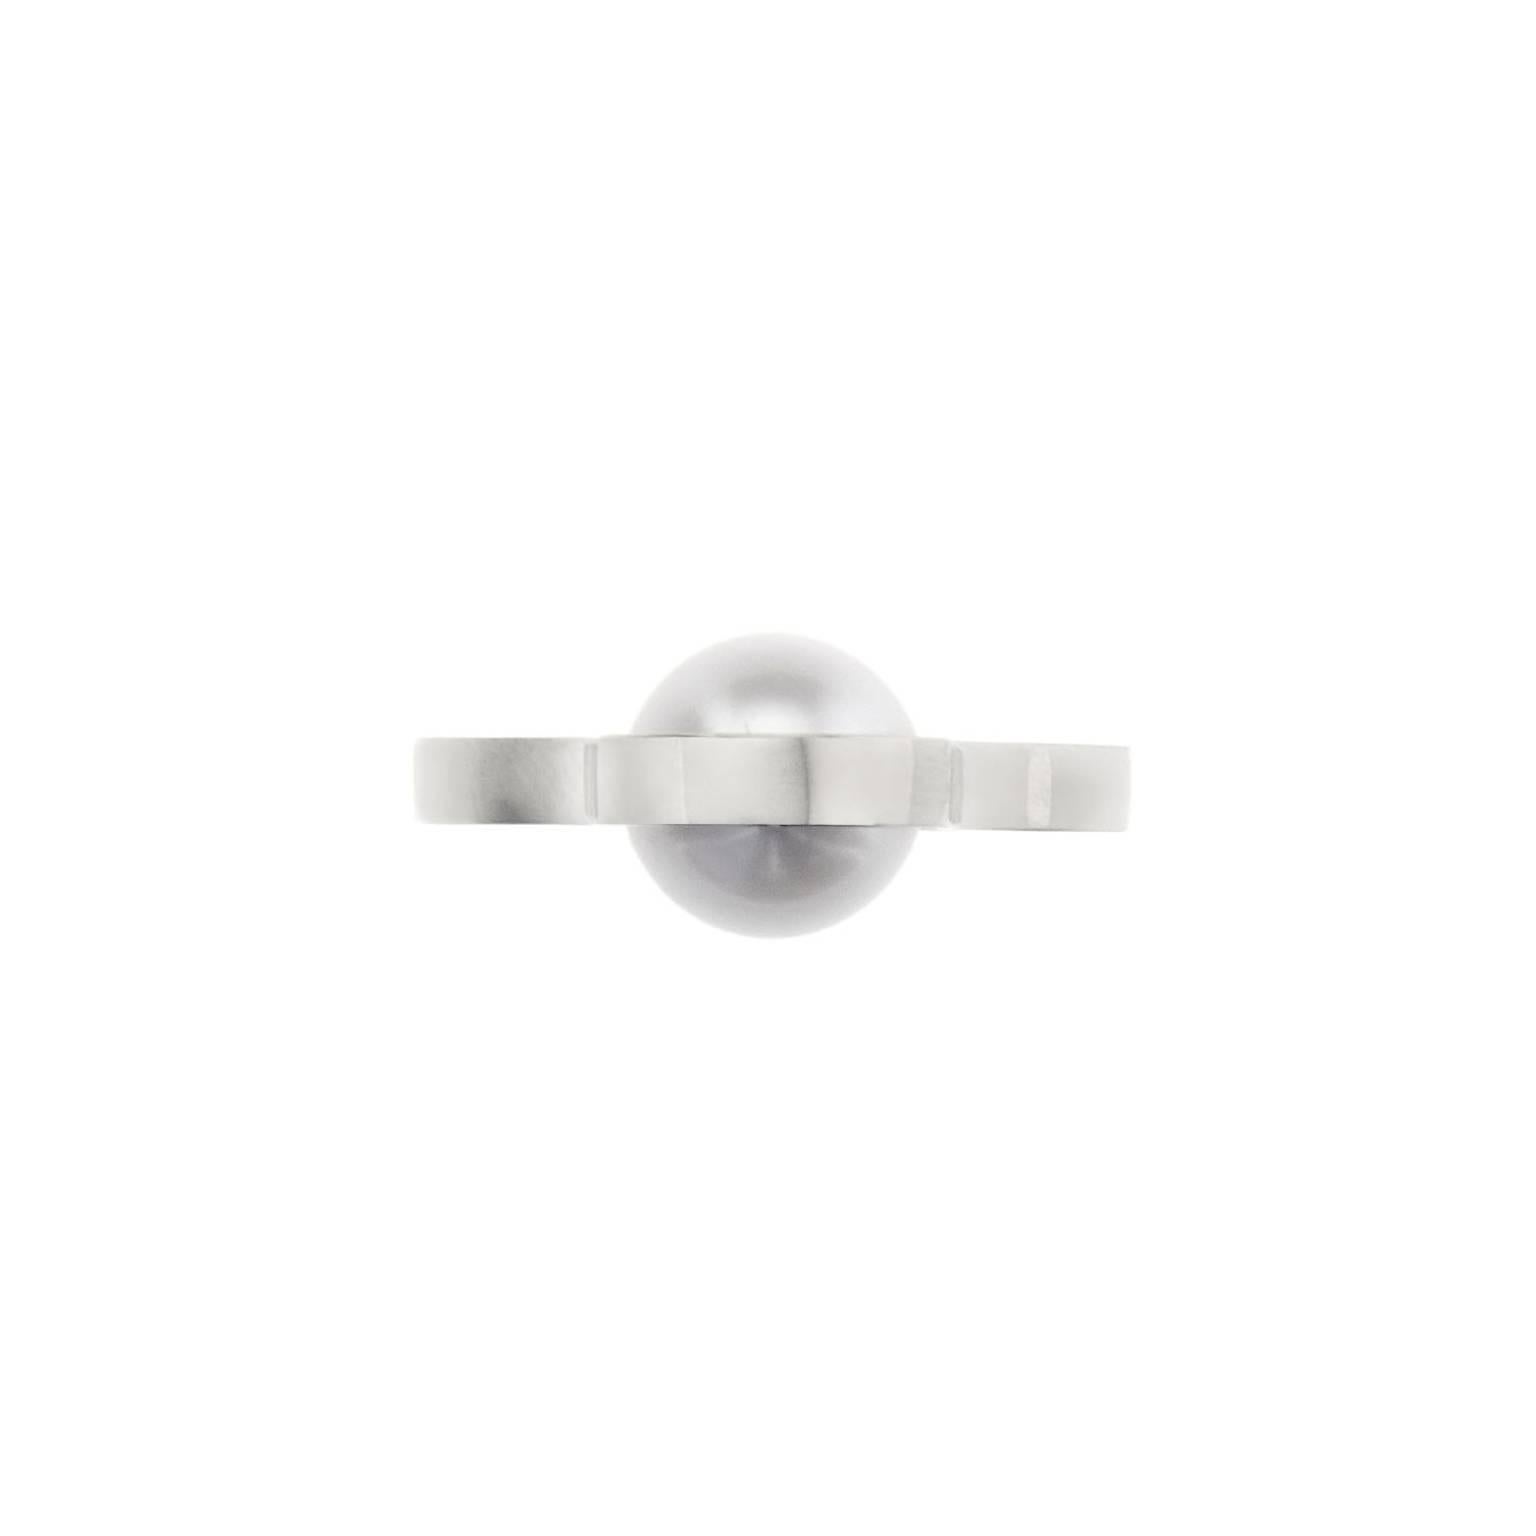 Nakkar Series ring in 18 karat white gold with Japanese cultured pearl. To be ordered, lead time 5 weeks. Made by hand in Nathalie Jean's Milan atelier.